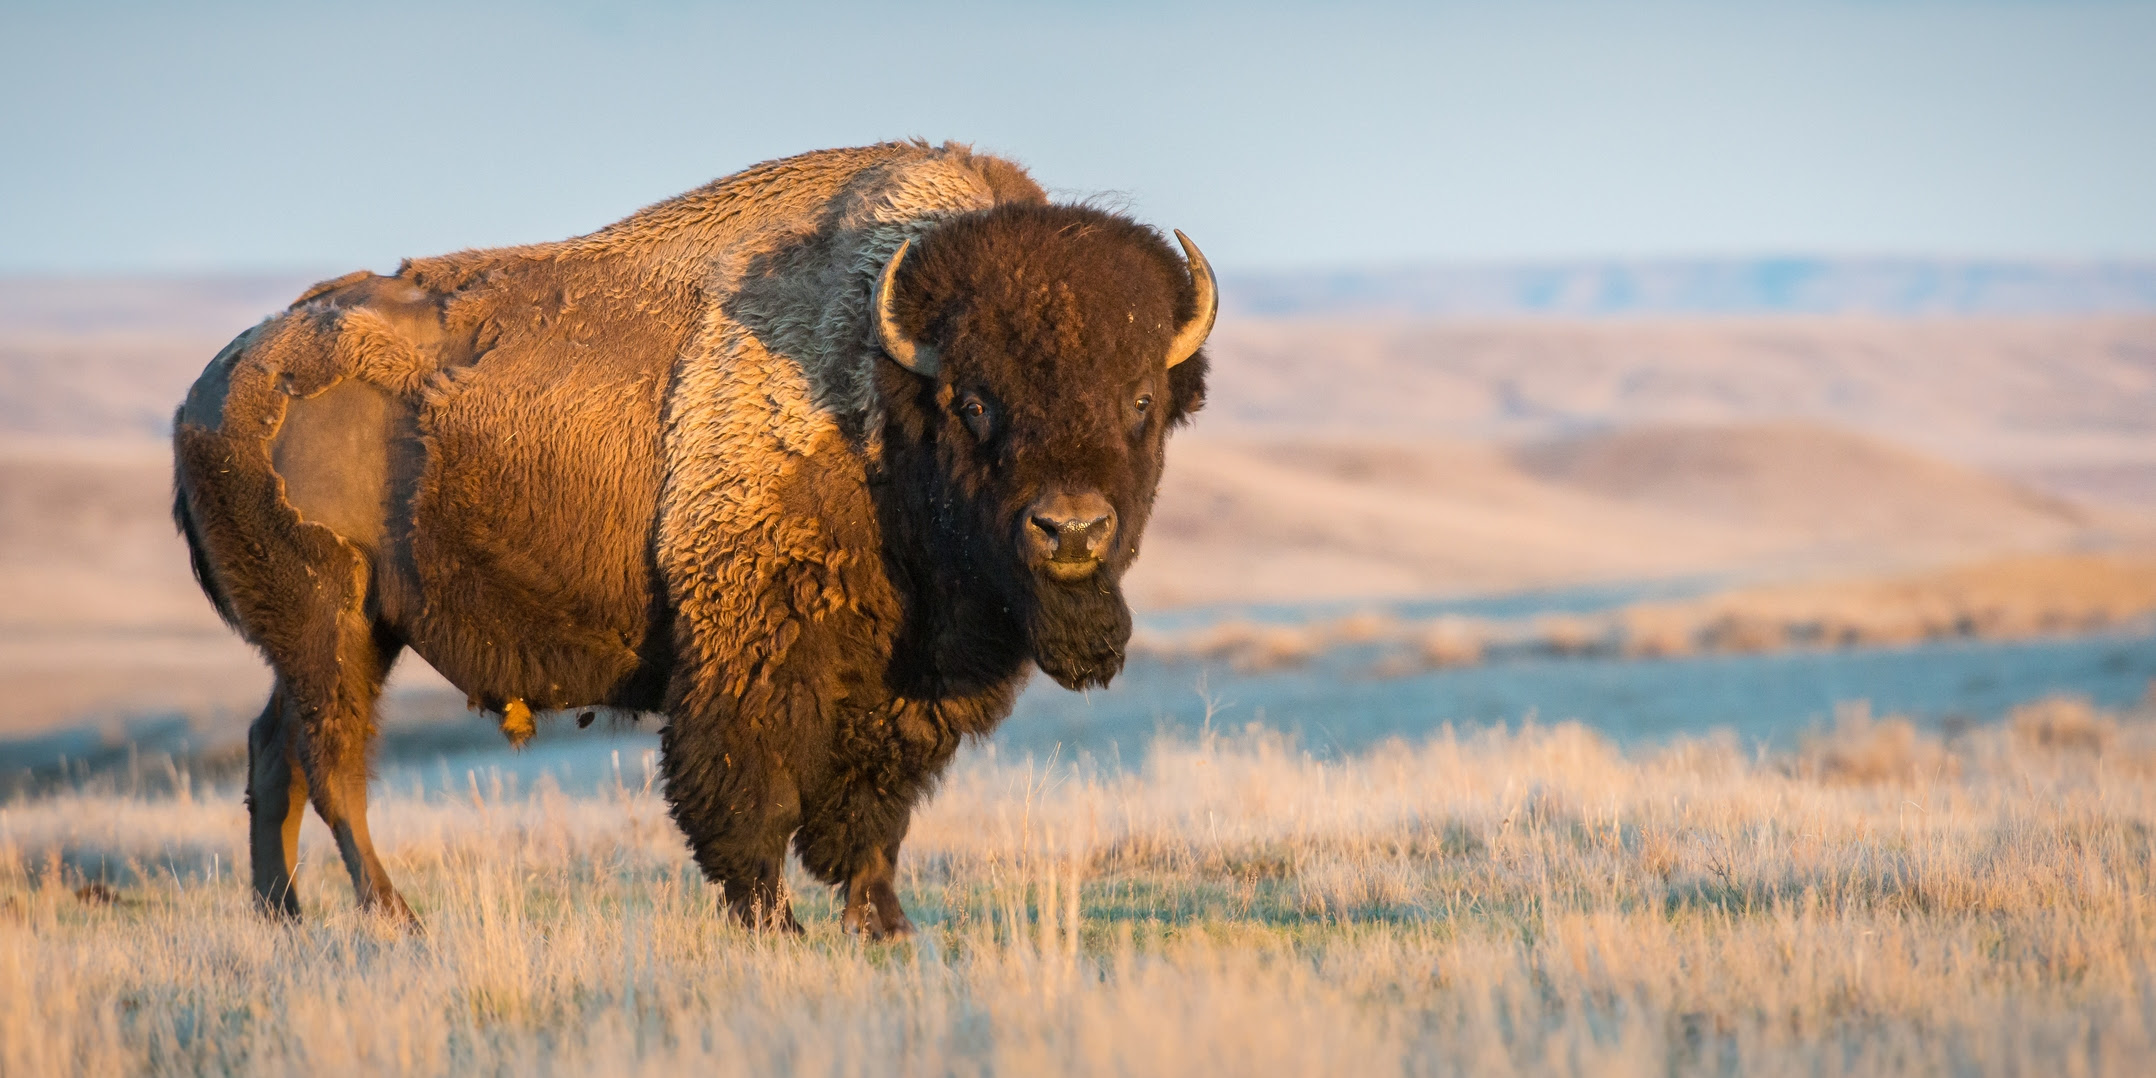 A bison standing in a field